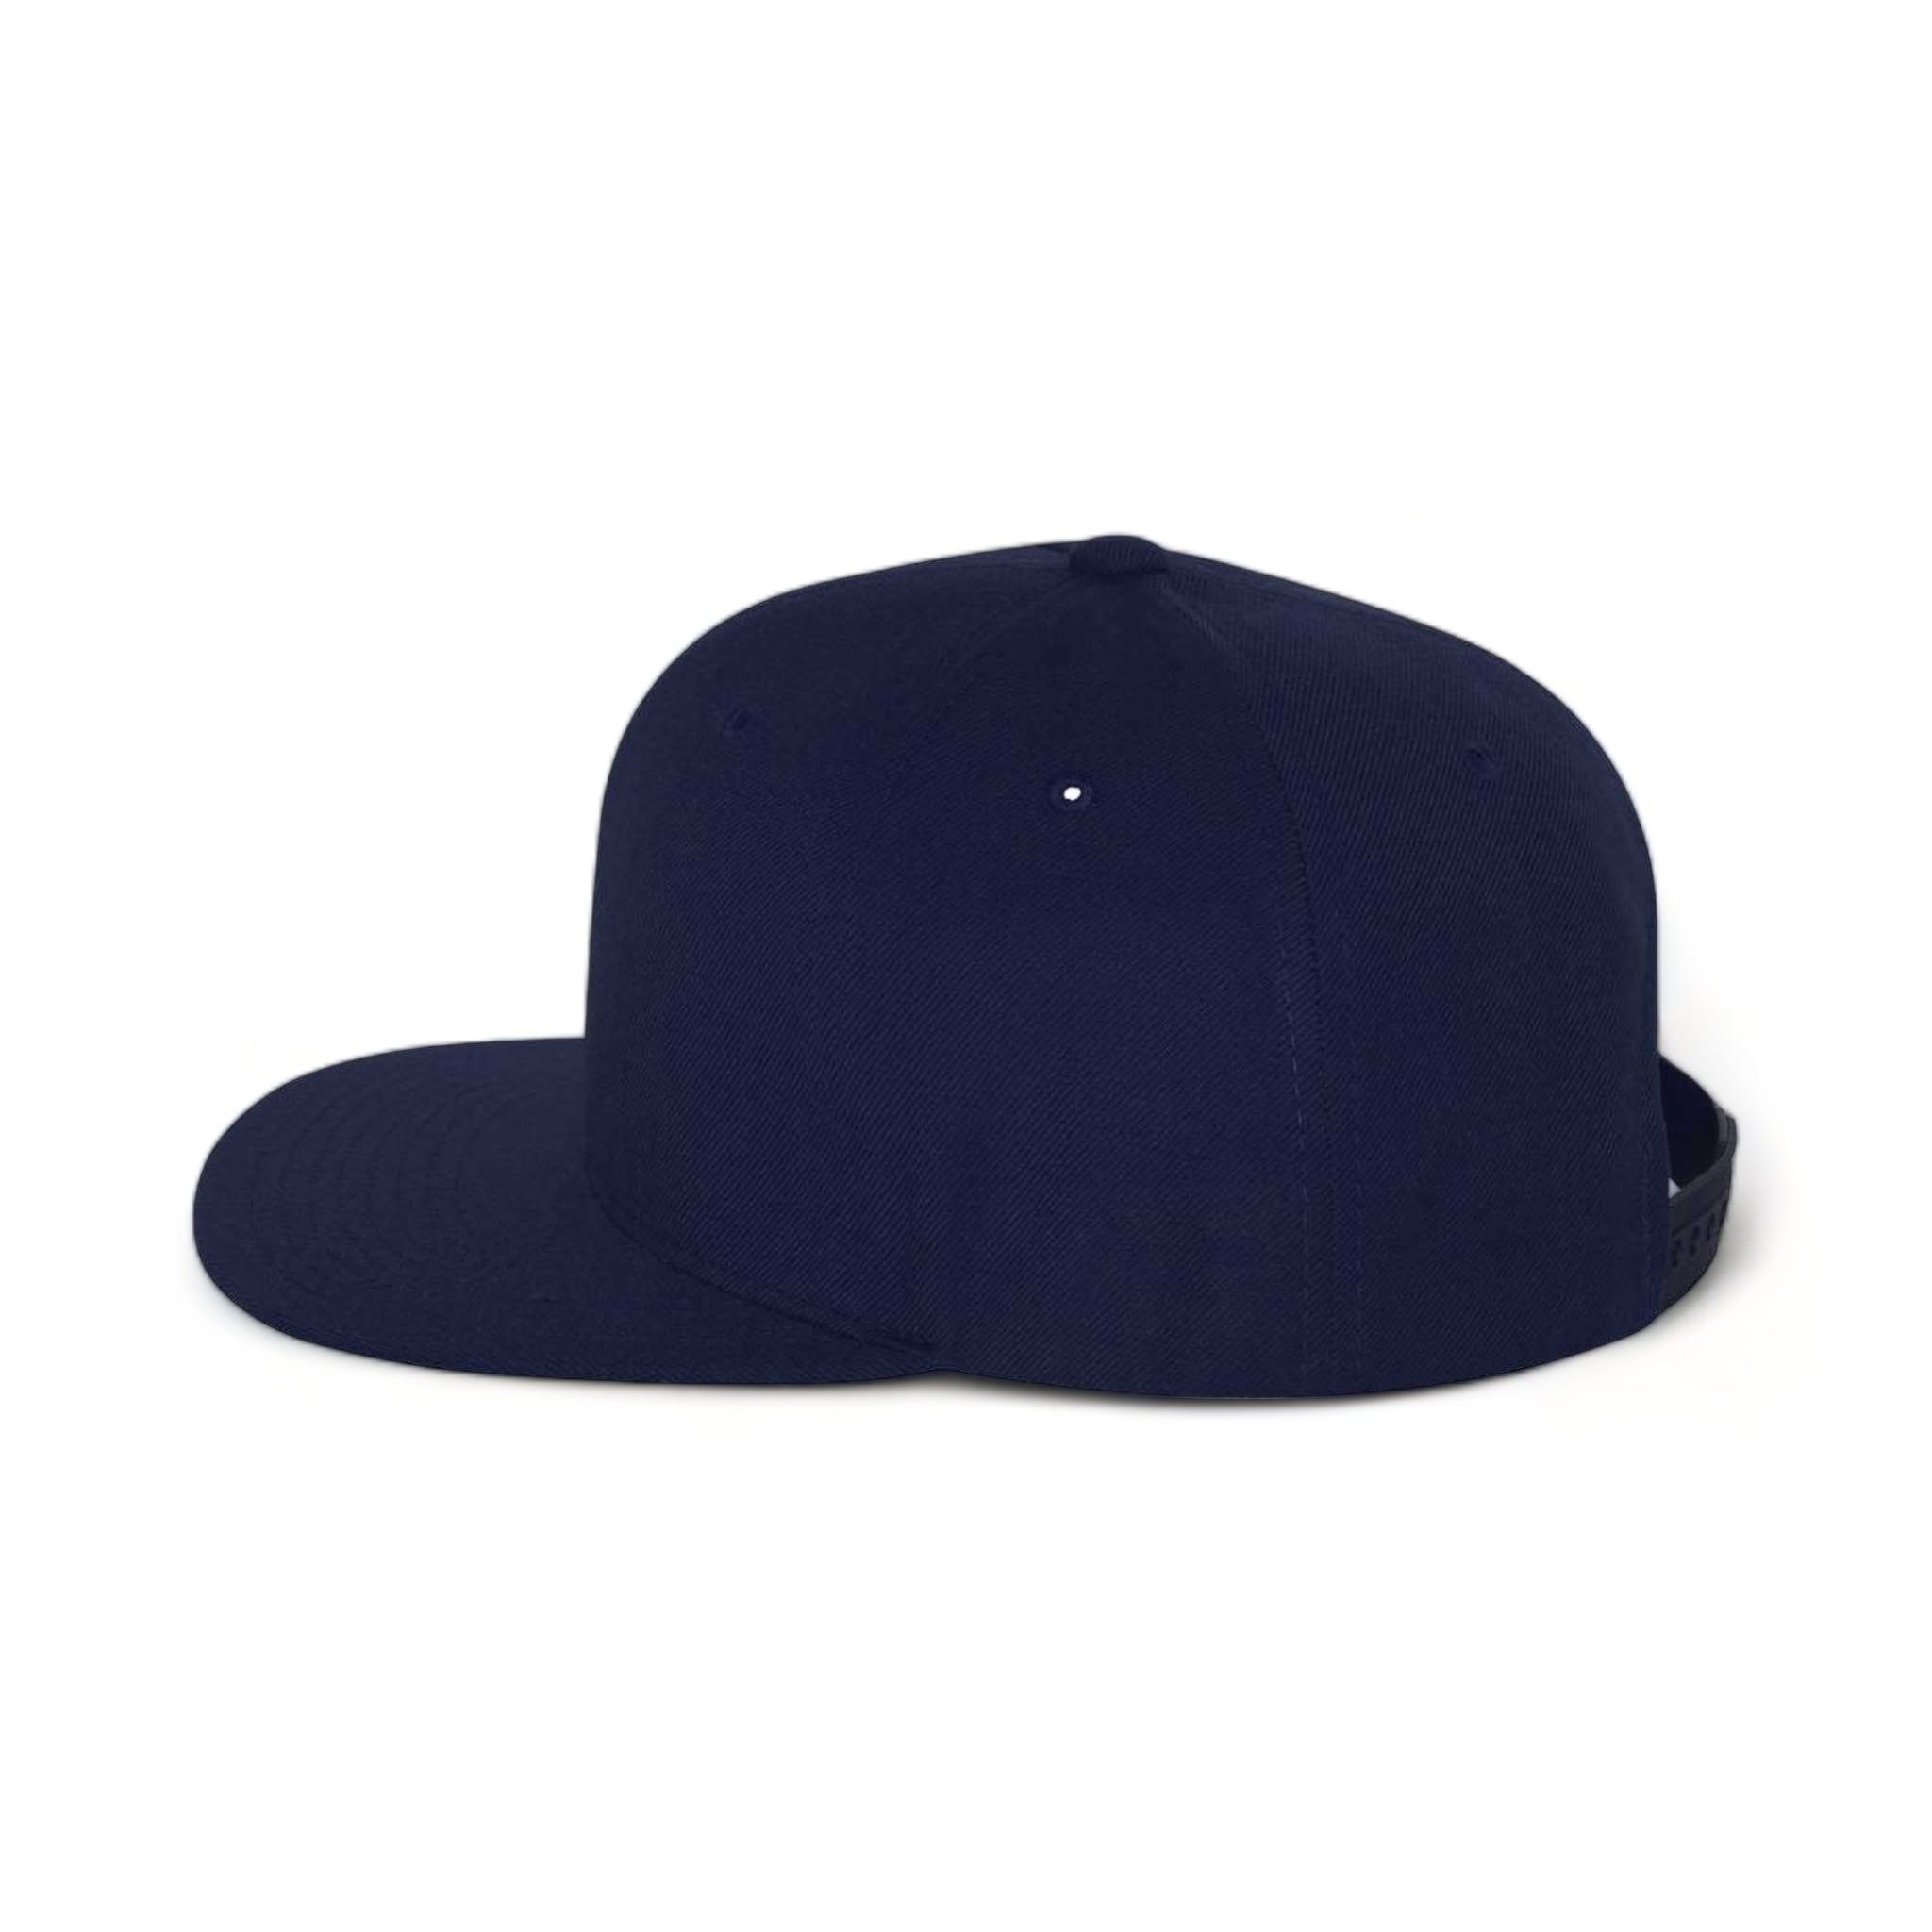 Side view of YP Classics 6089M custom hat in navy